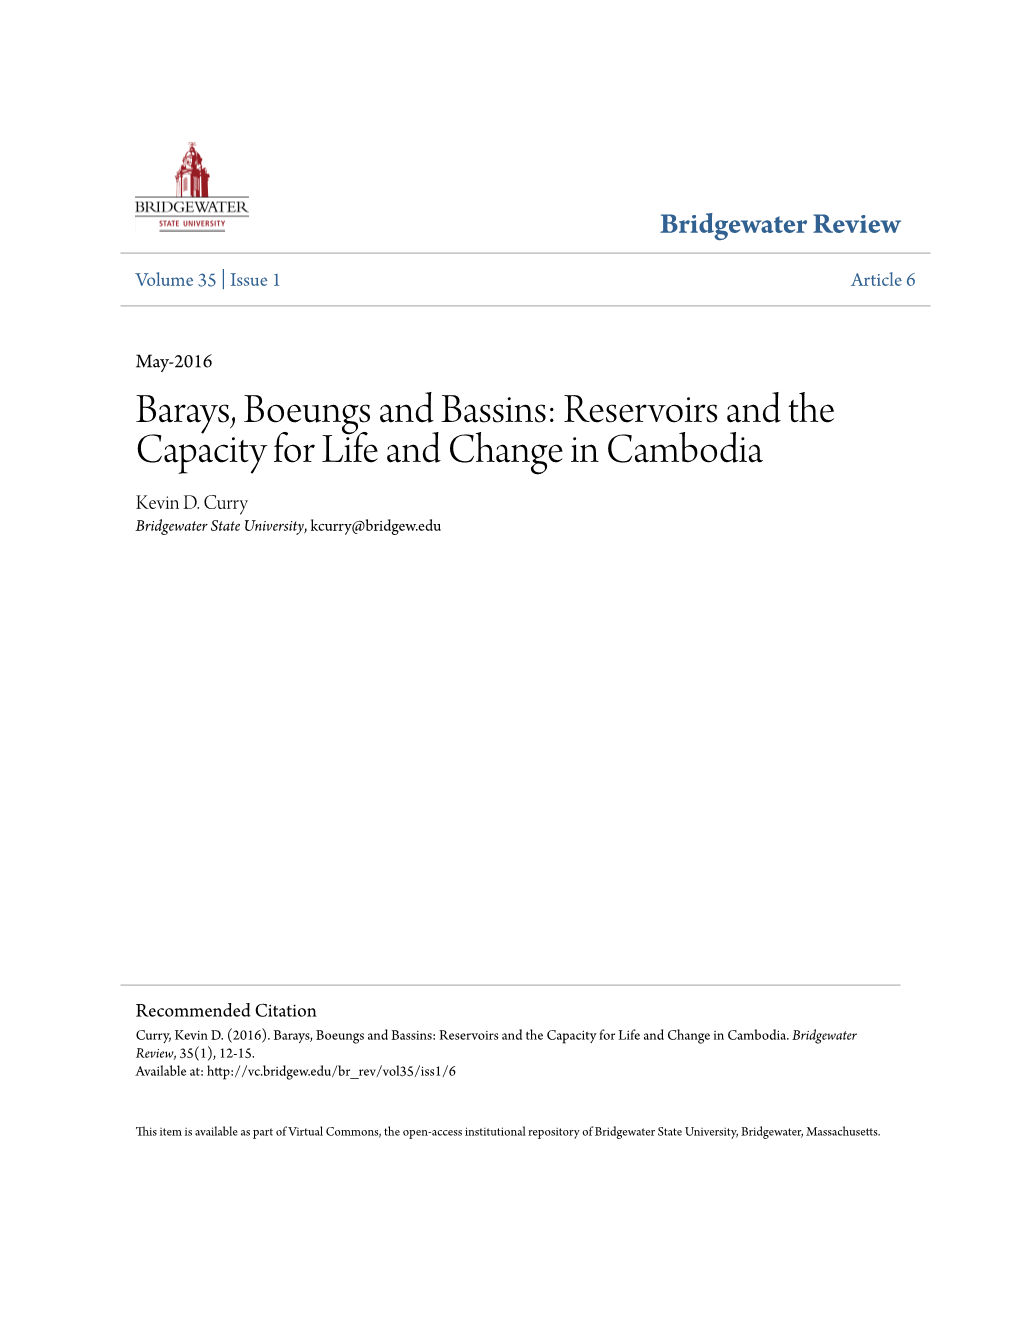 Barays, Boeungs and Bassins: Reservoirs and the Capacity for Life and Change in Cambodia Kevin D